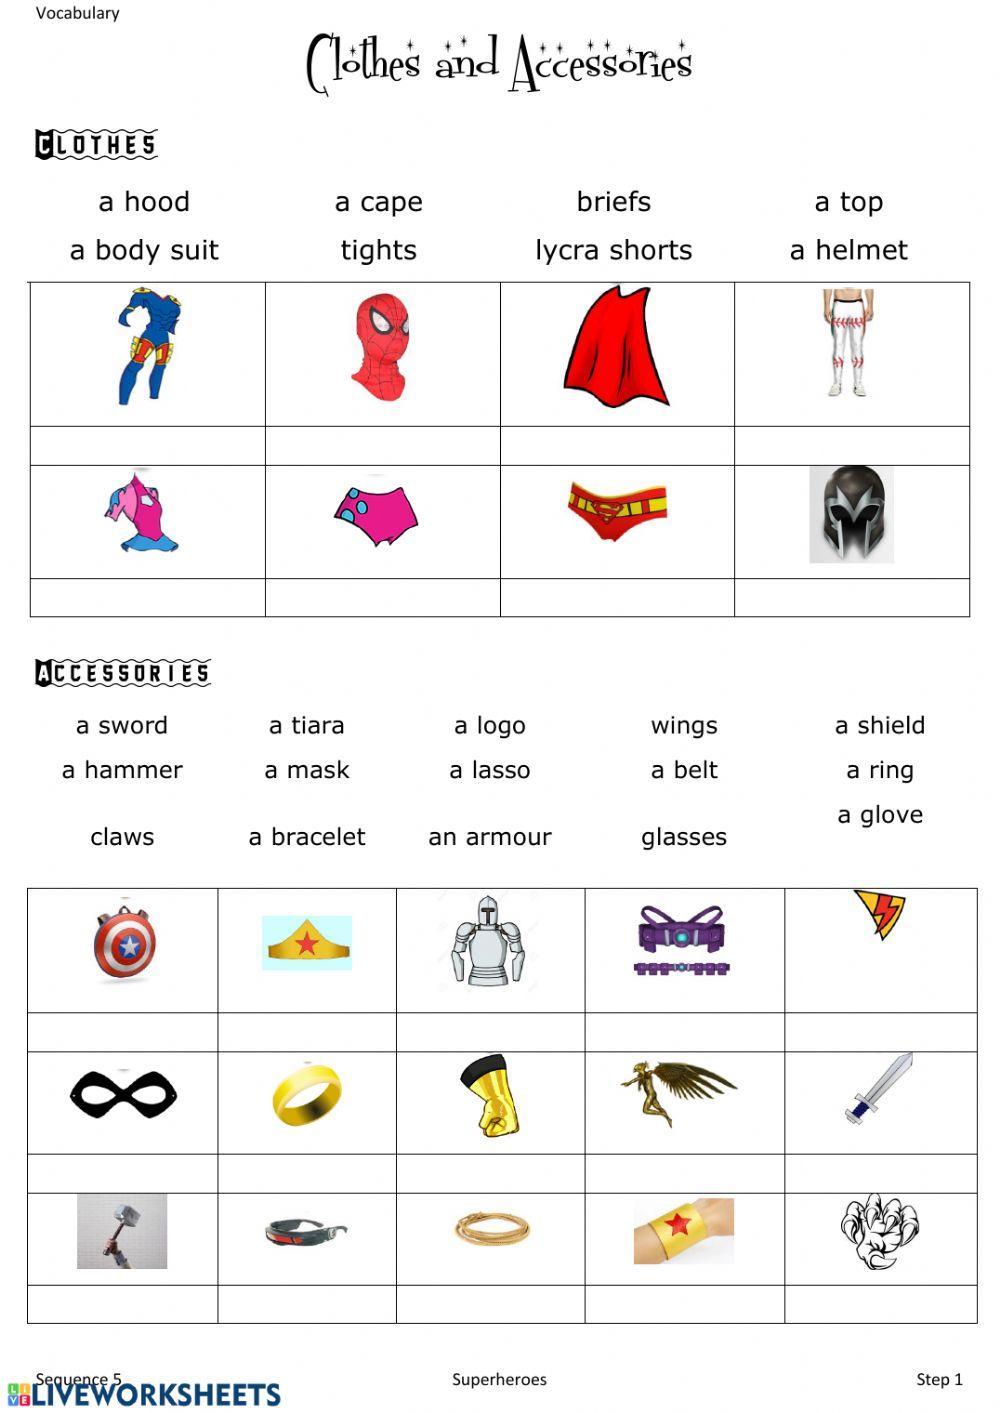 Vocabulary costume and accessories superheroes